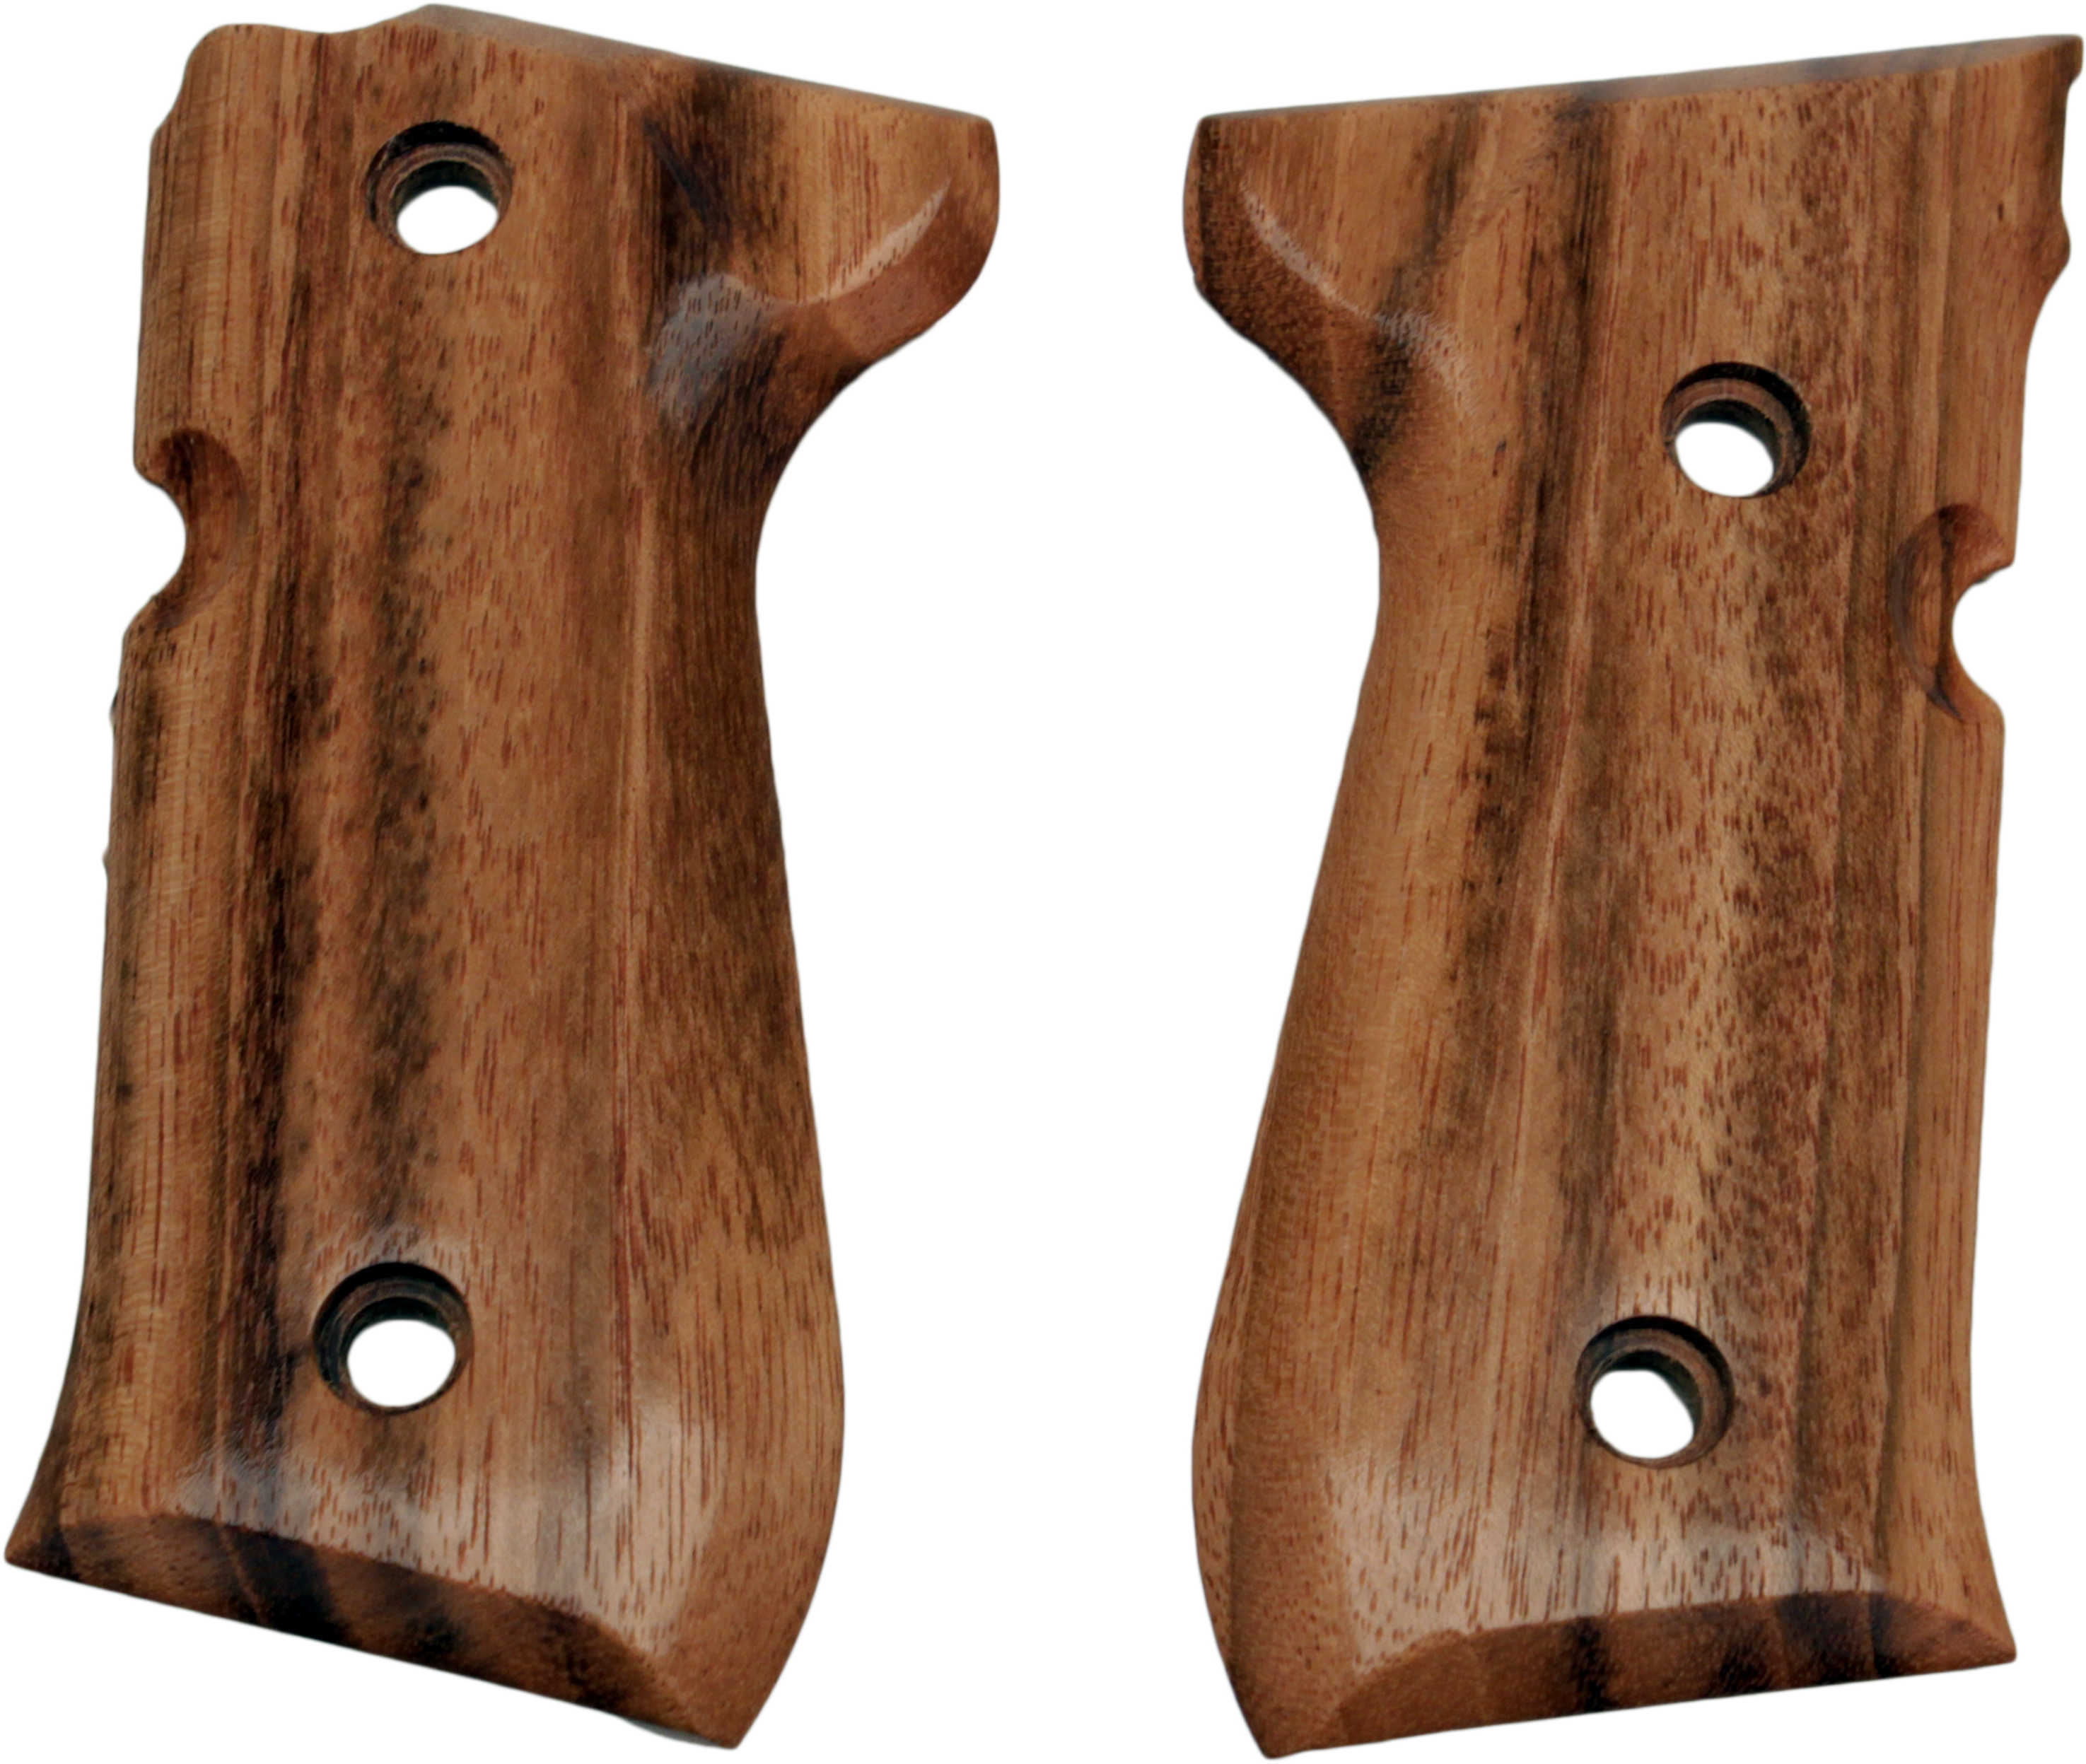 Hogue Goncalo Alves Wood Grips For Beretta 92F Md: 92210